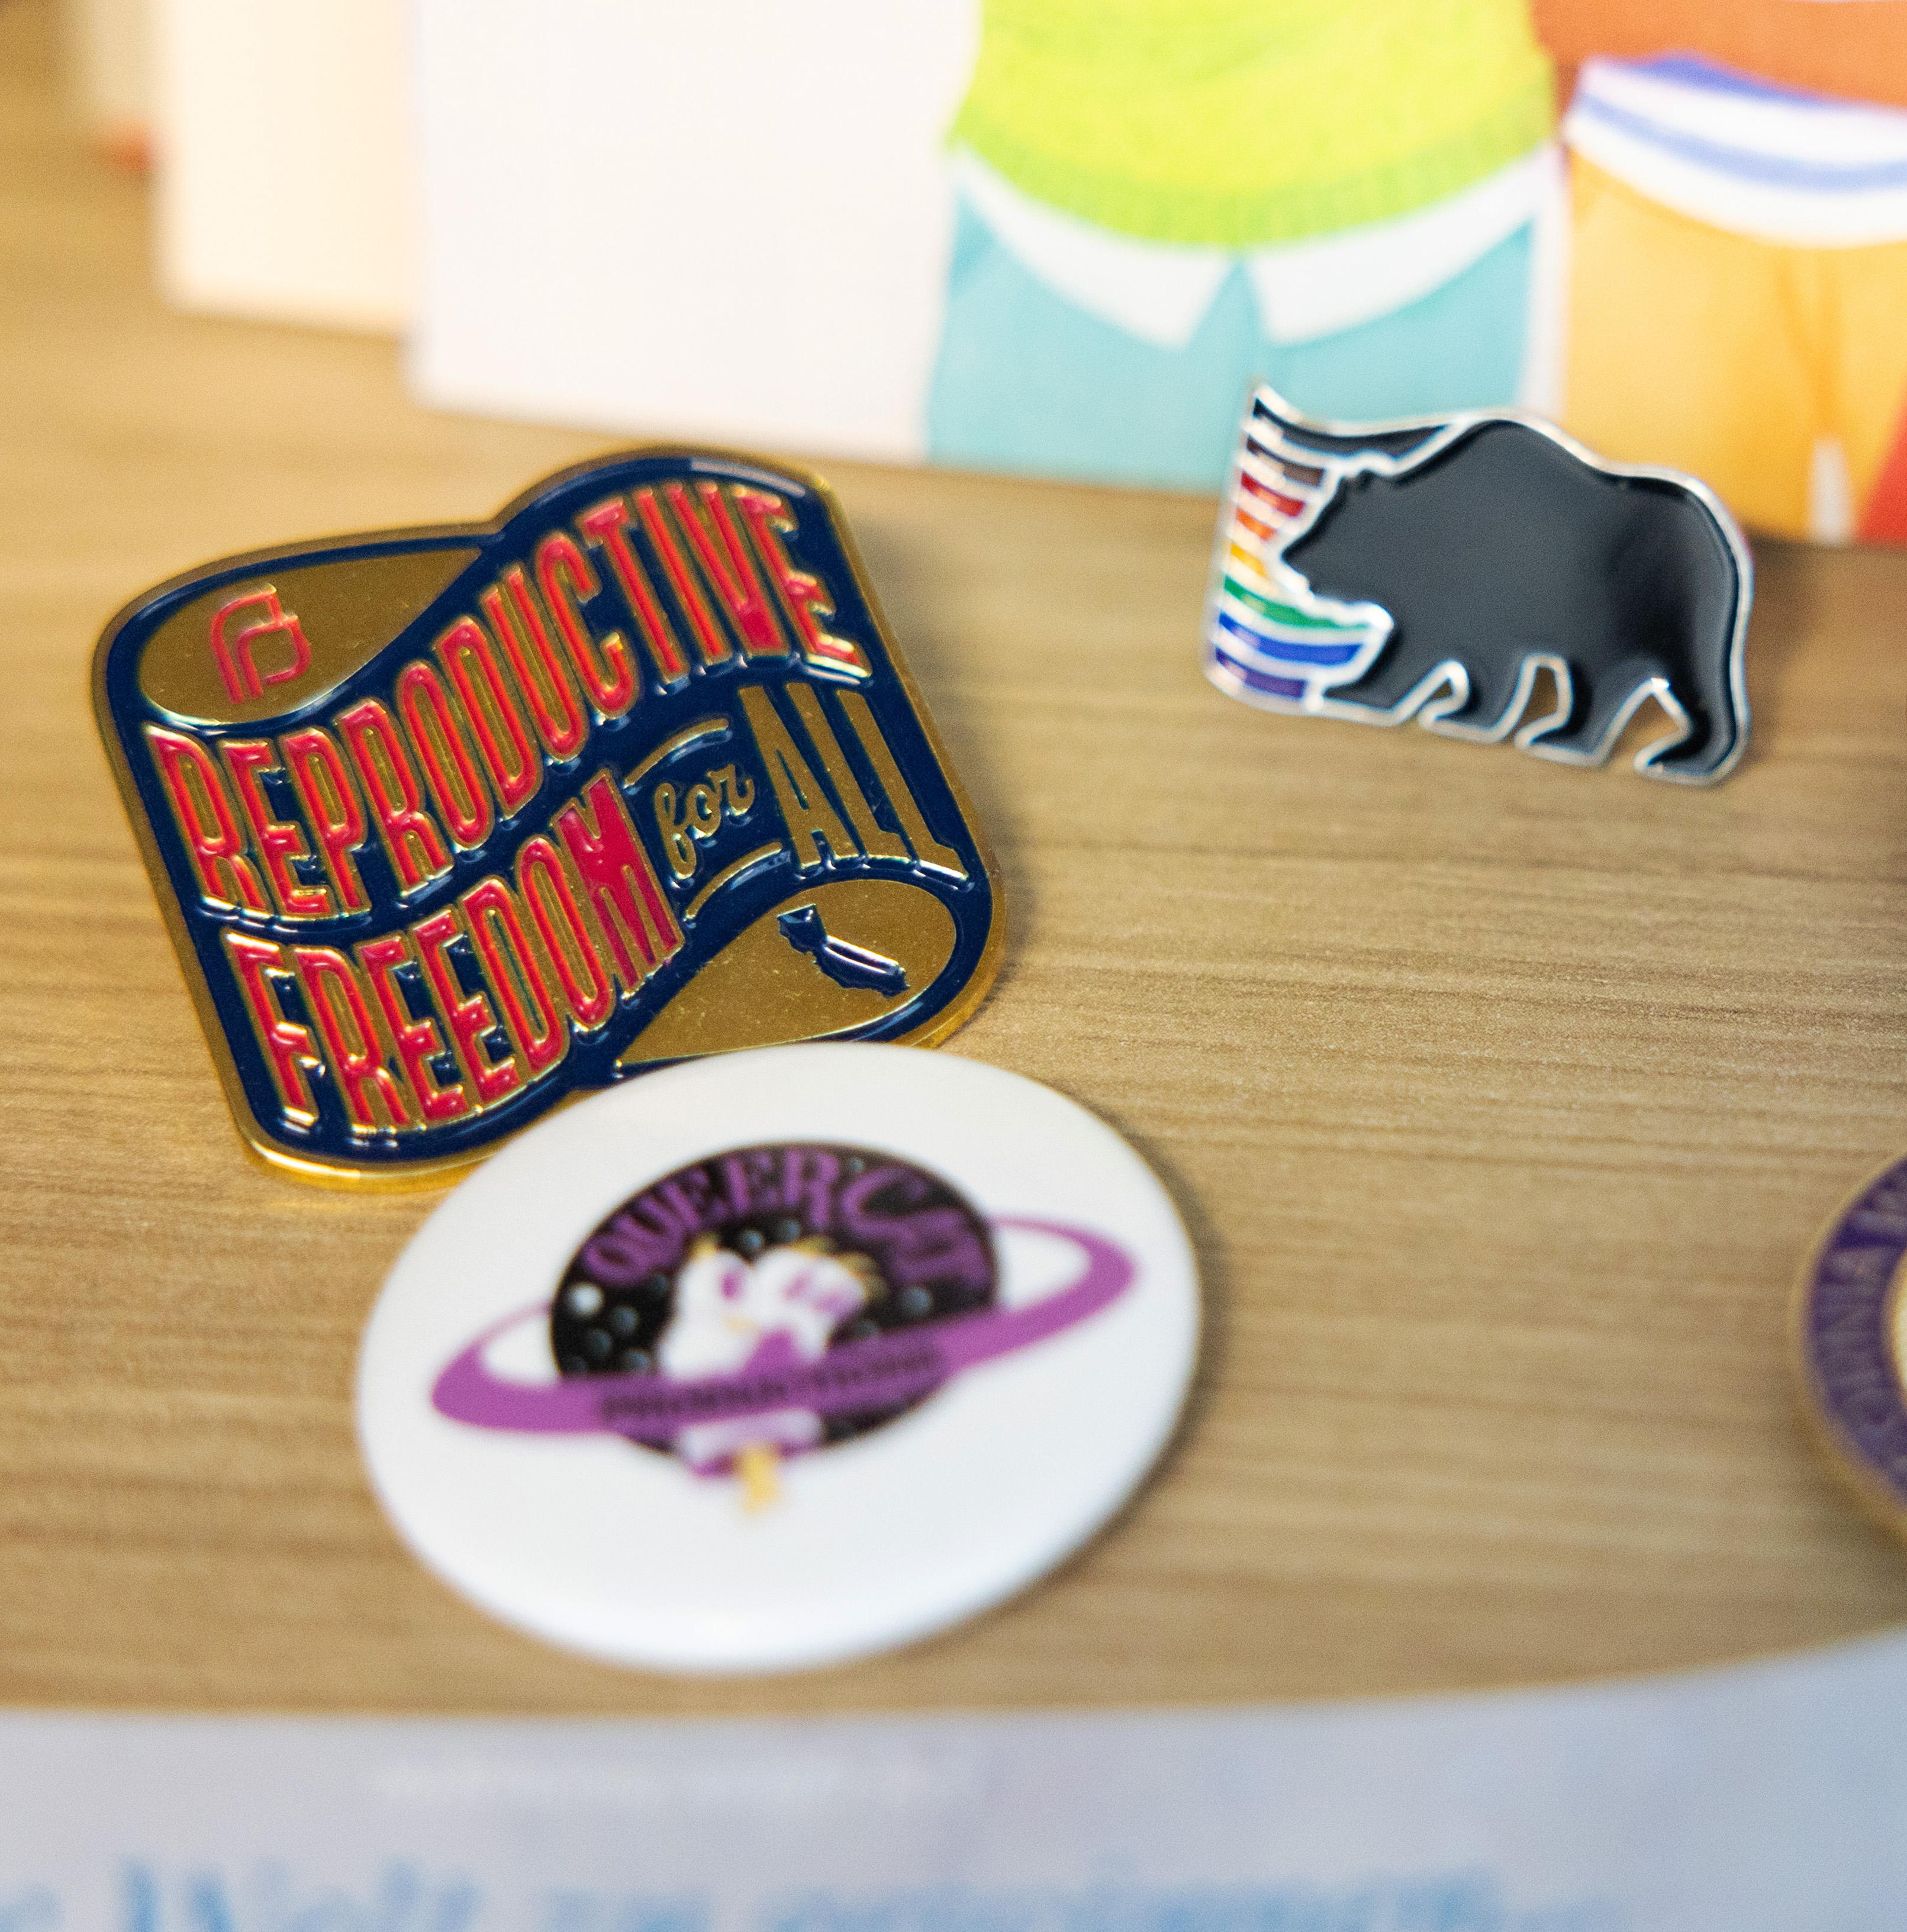 Enamel pins with messages like &quot;Reproductive Freedom For All&quot; &amp; graphics, like a bear with colorful stripes, on a wood surface.